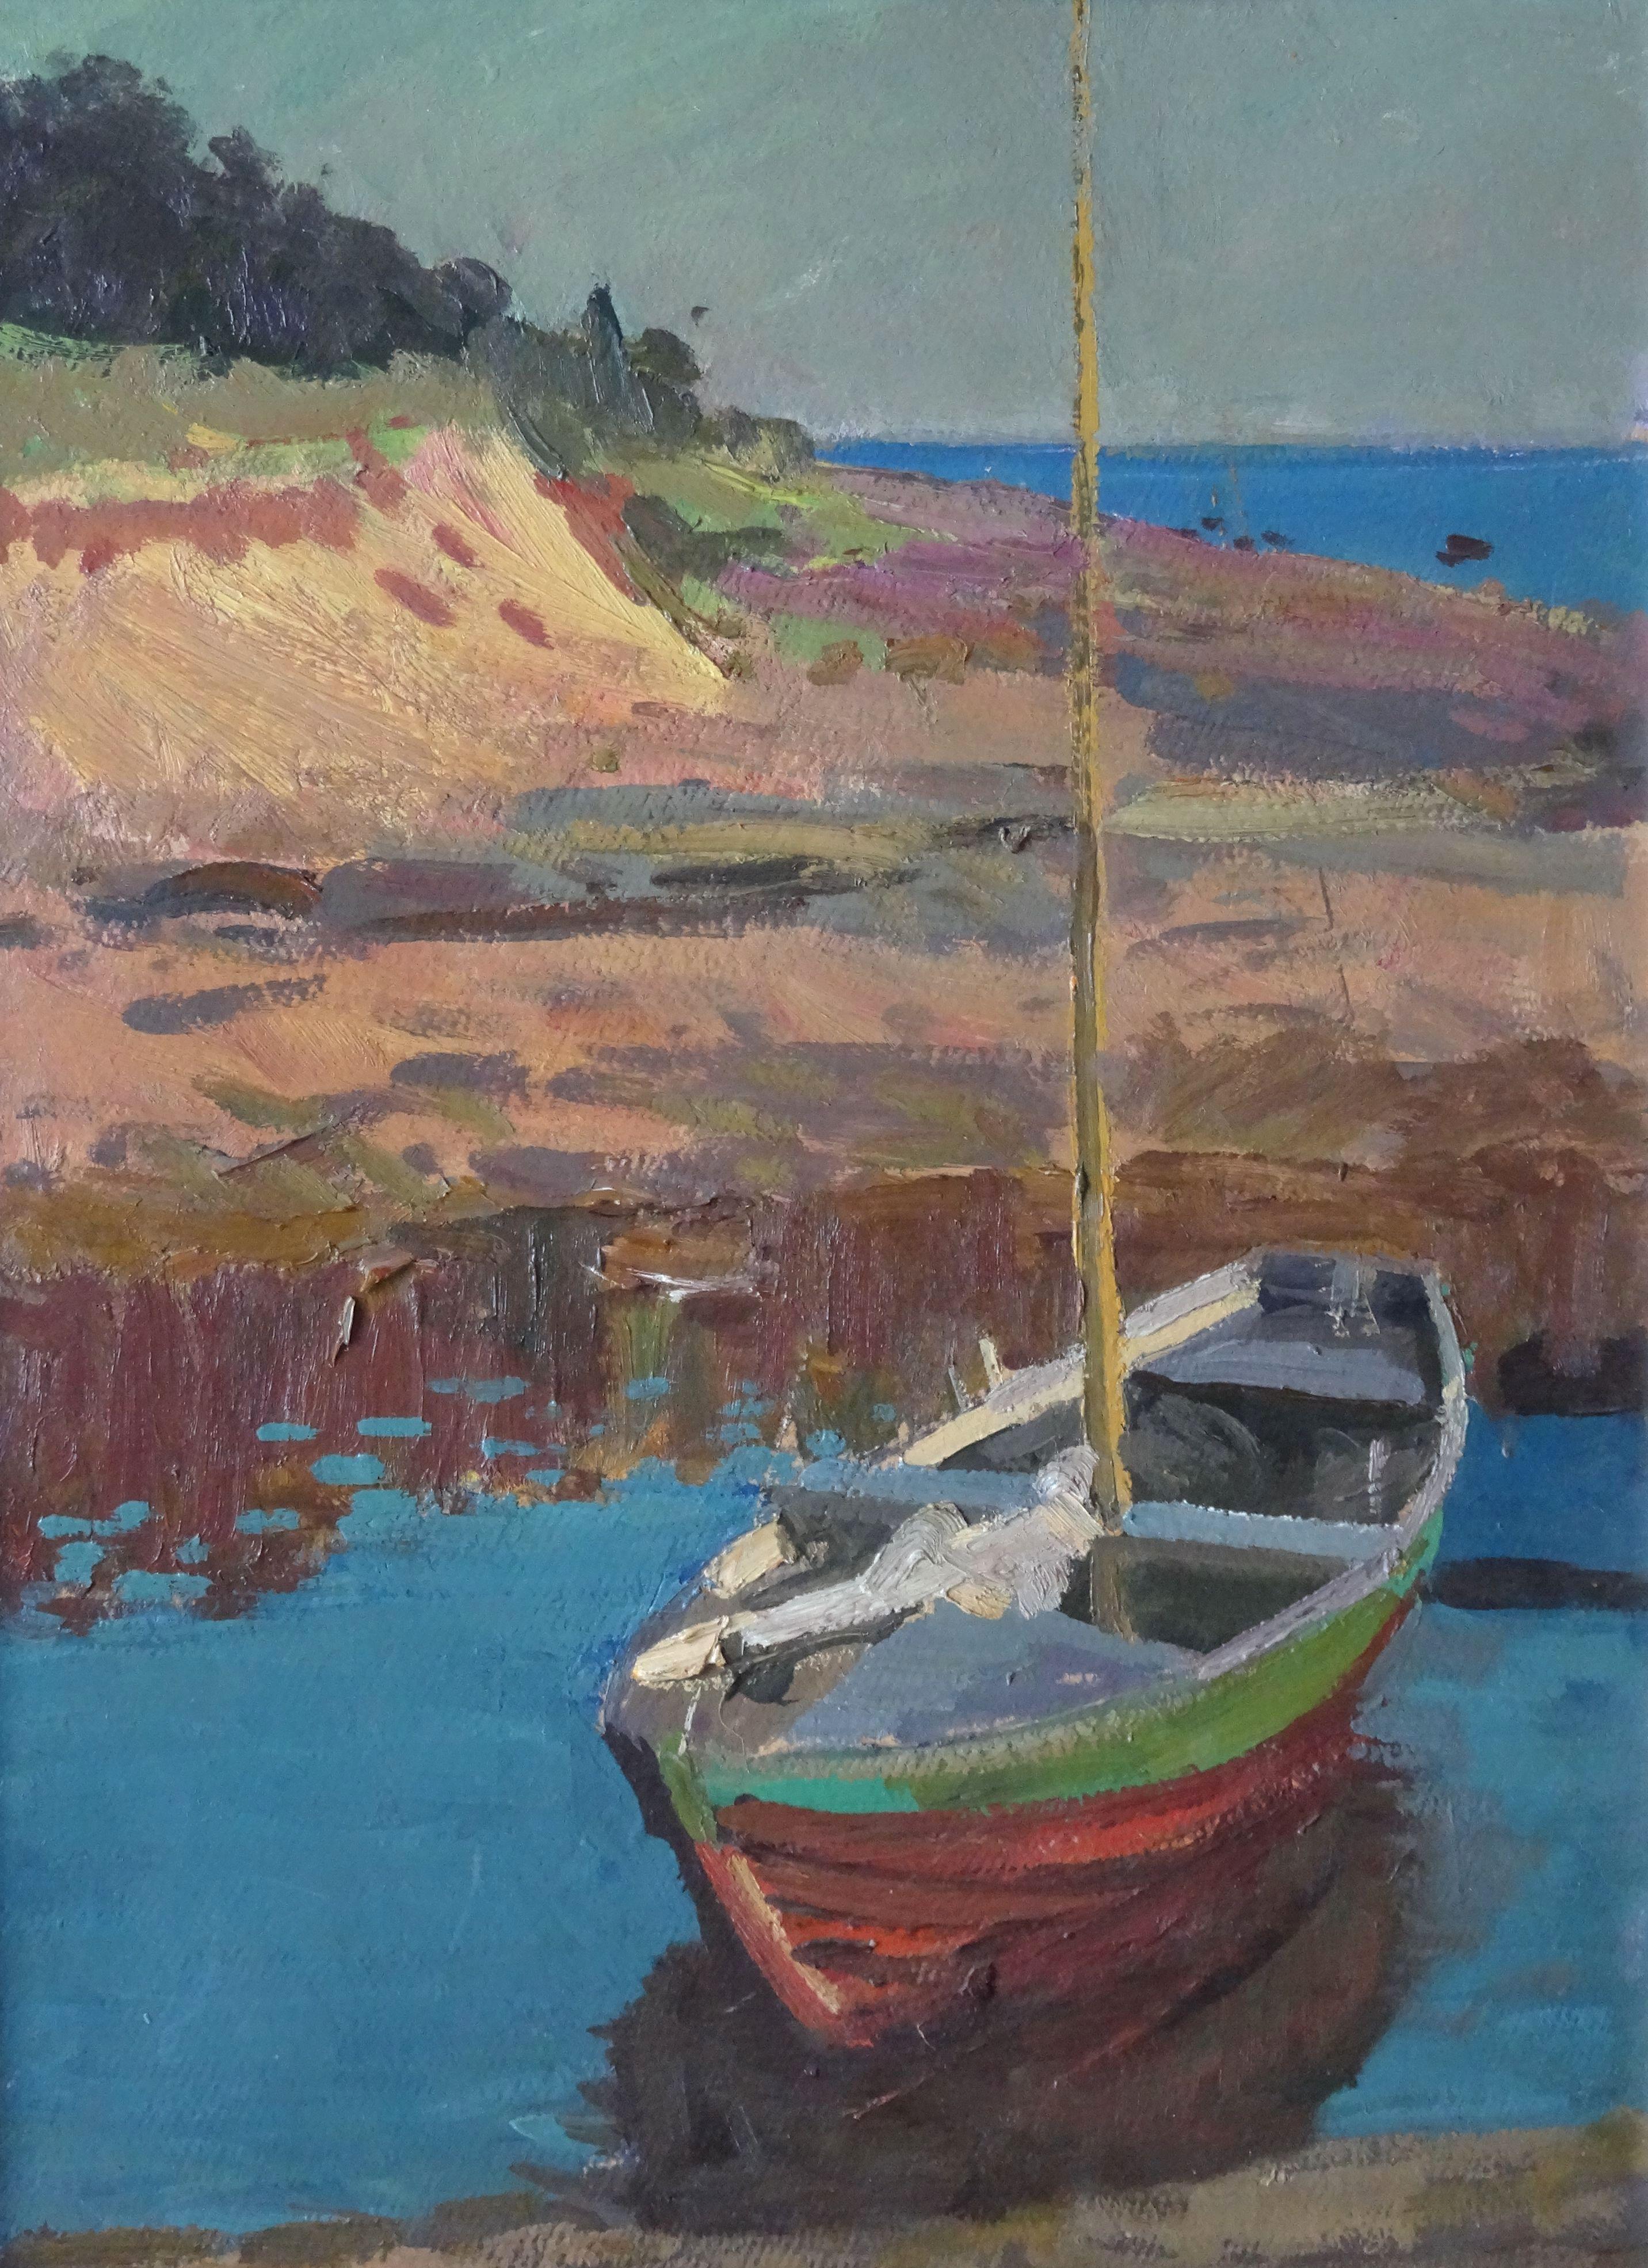 Boat on the river bank. 1980. Oil on cardboard, 54x41 cm